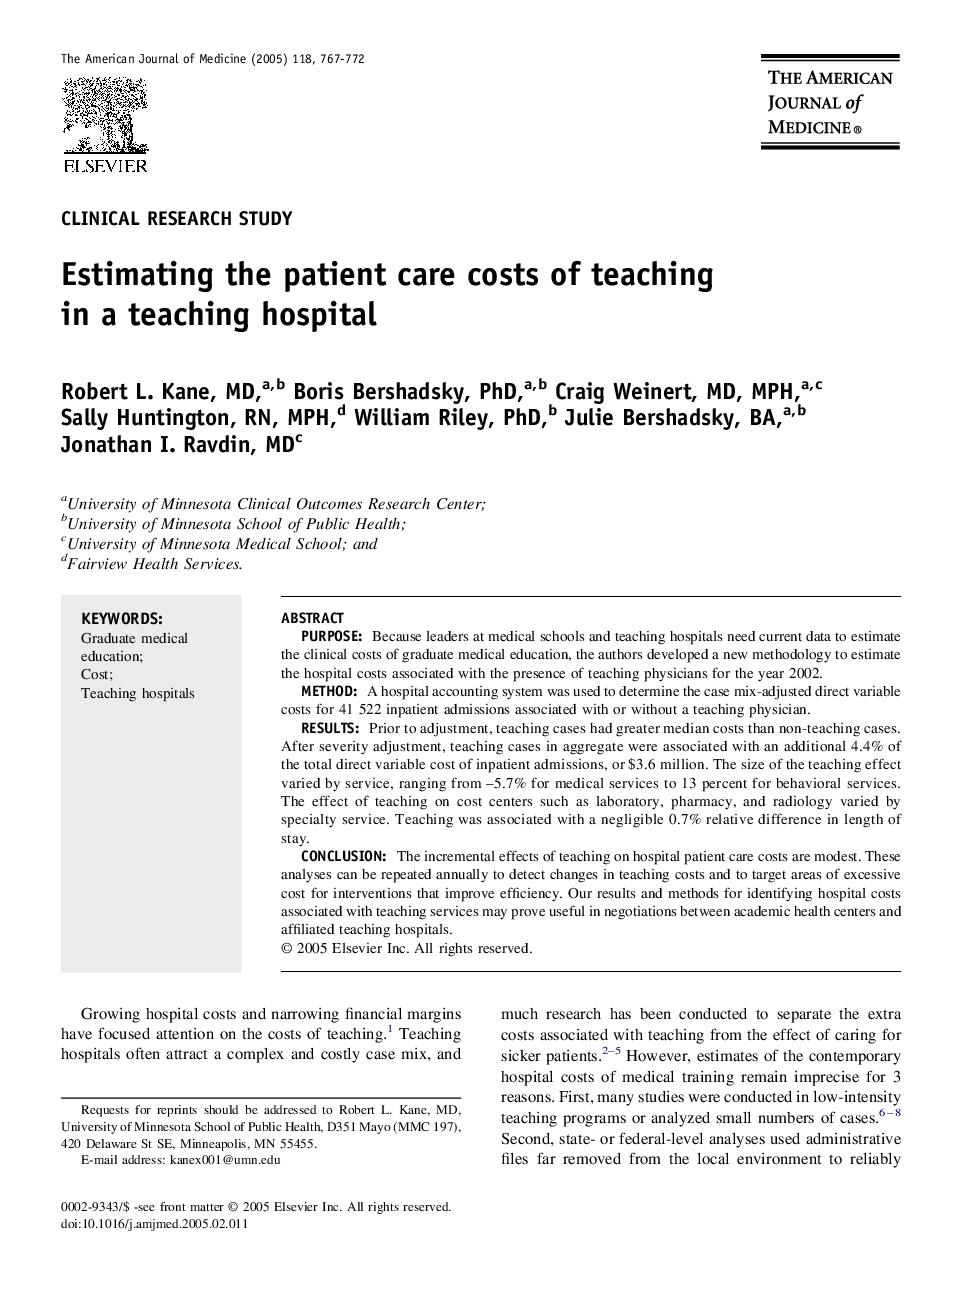 Estimating the patient care costs of teaching in a teaching hospital